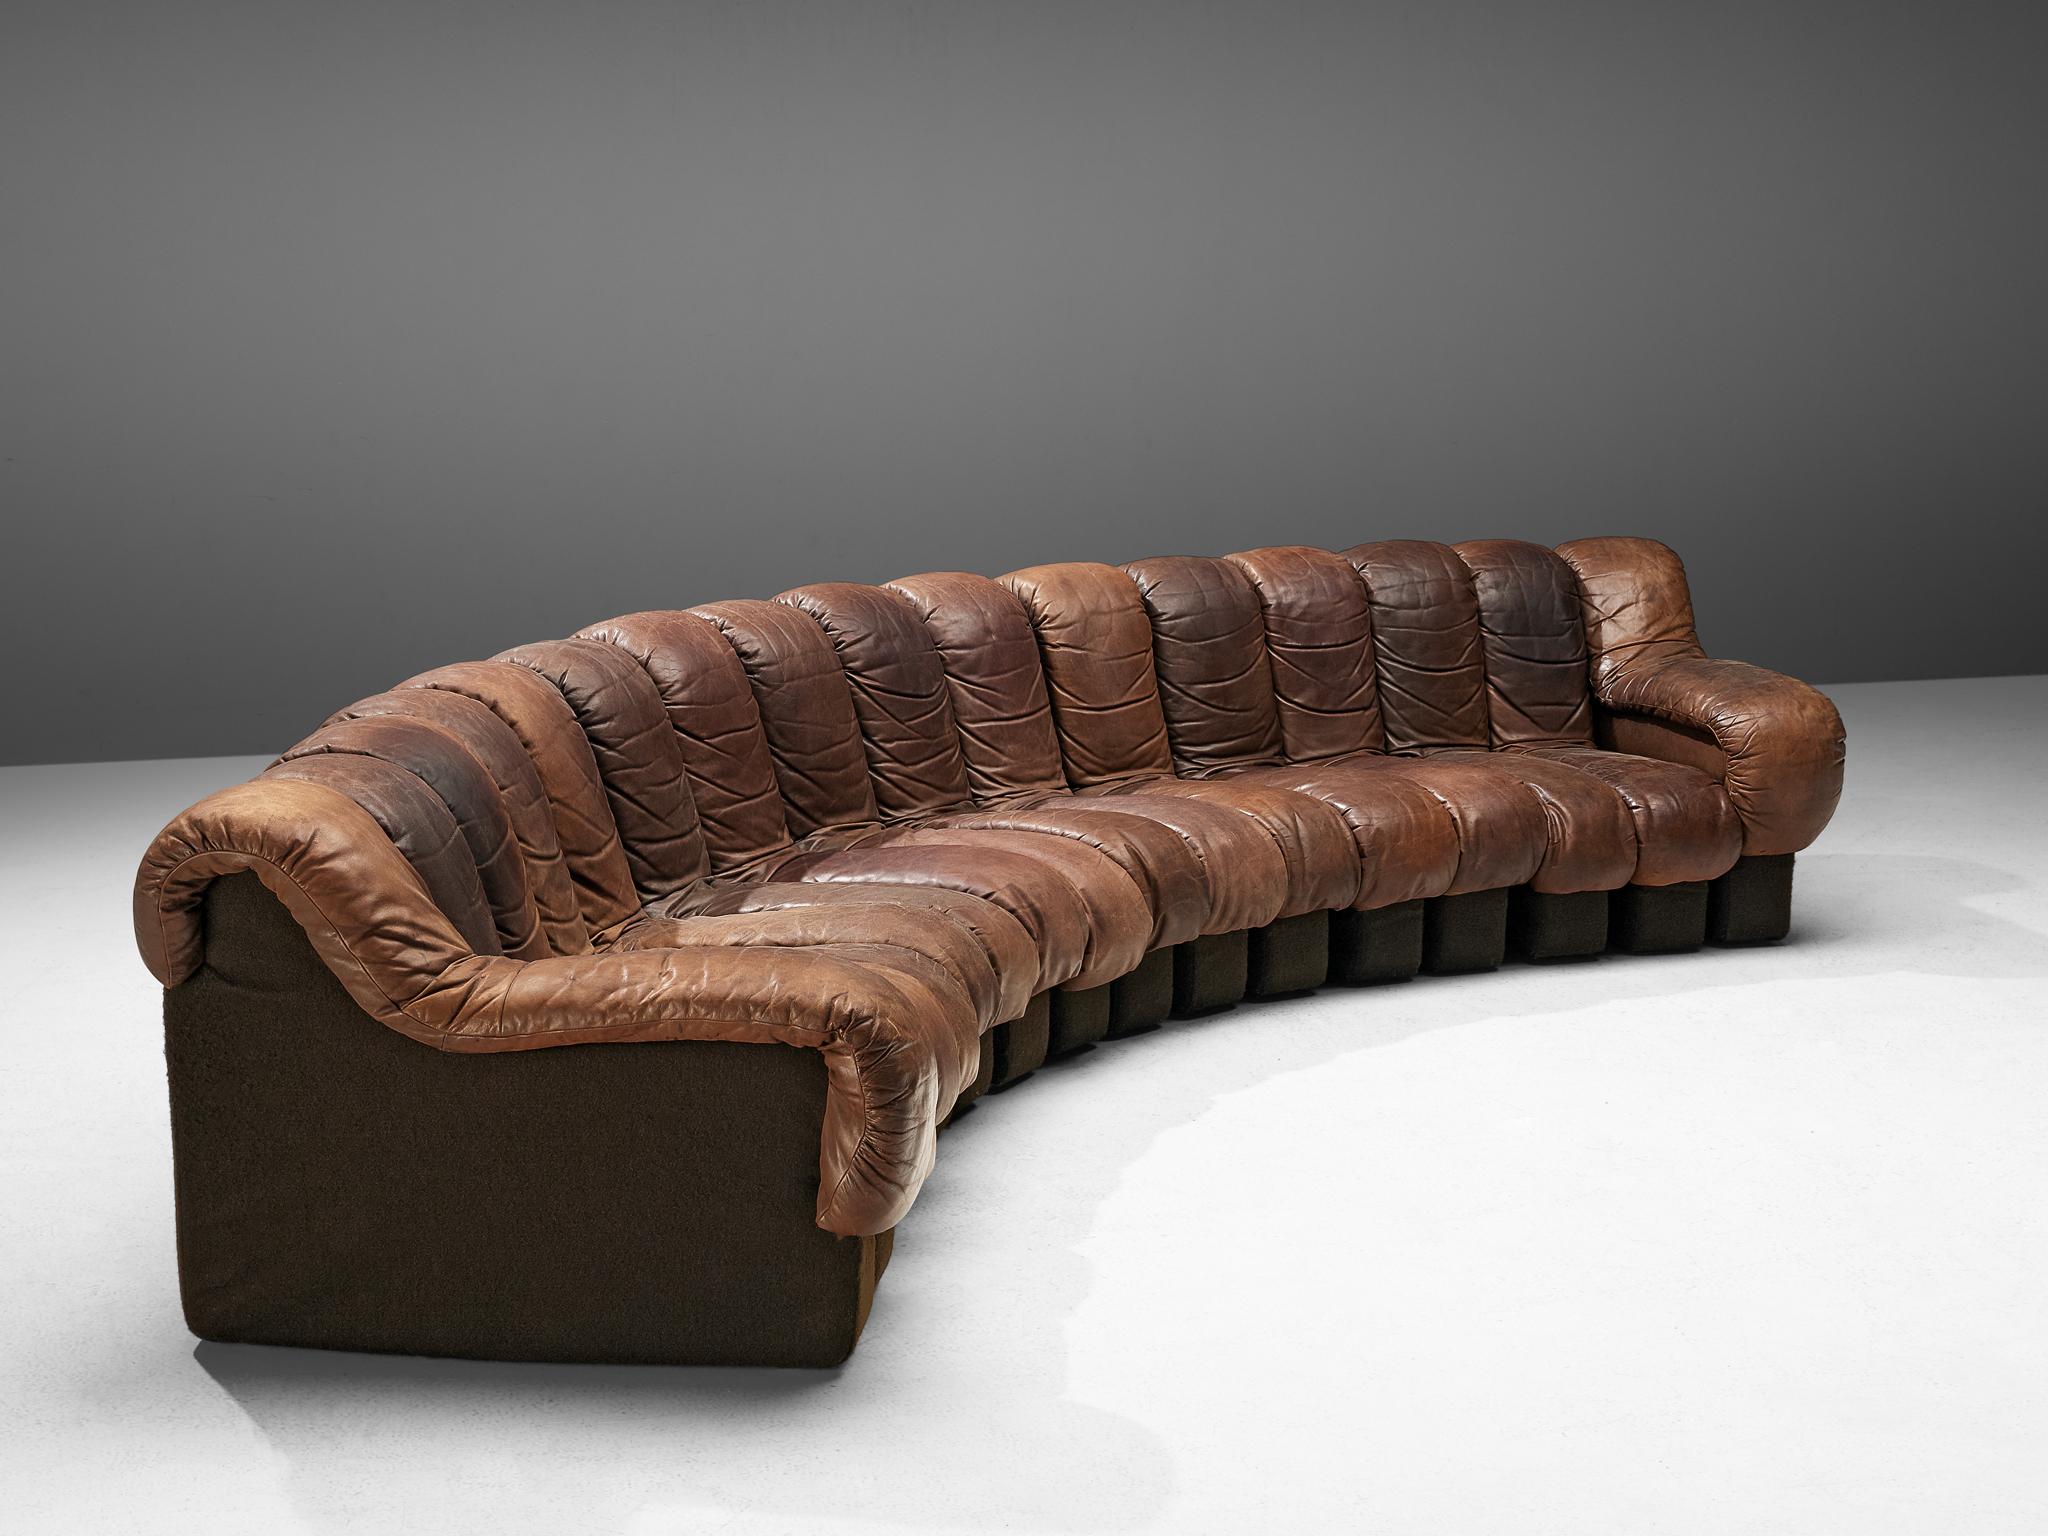 De Sede ‘Snake’ DS-600, brown leather, Switzerland, 1972.

A design by Ueli bergere, Elenora Peduzzi-Riva, Heinz Ulrich and Klaus Vogt at De Sede, Switzerland. De Sede 'Non Stop' sectional sofa containing of fourteen seating pieces and two armrests